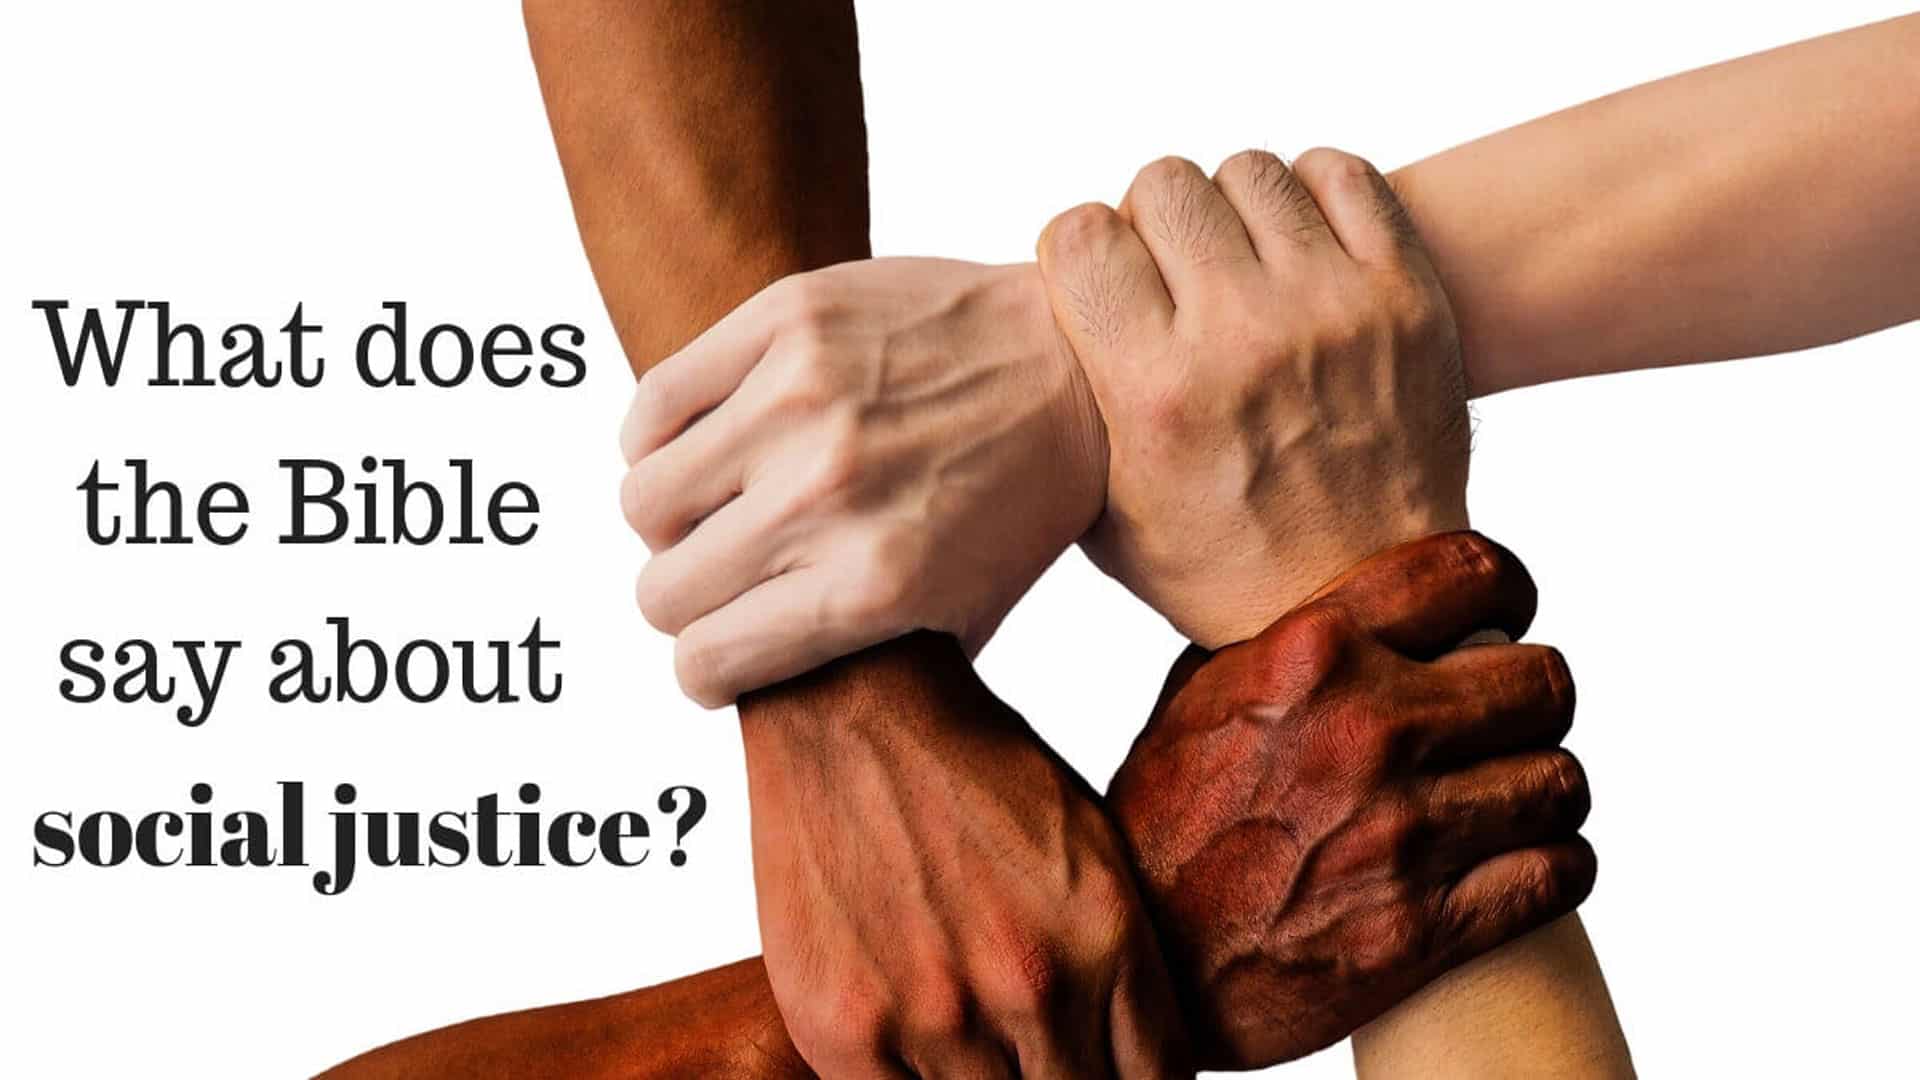 The Bible & Social Justice